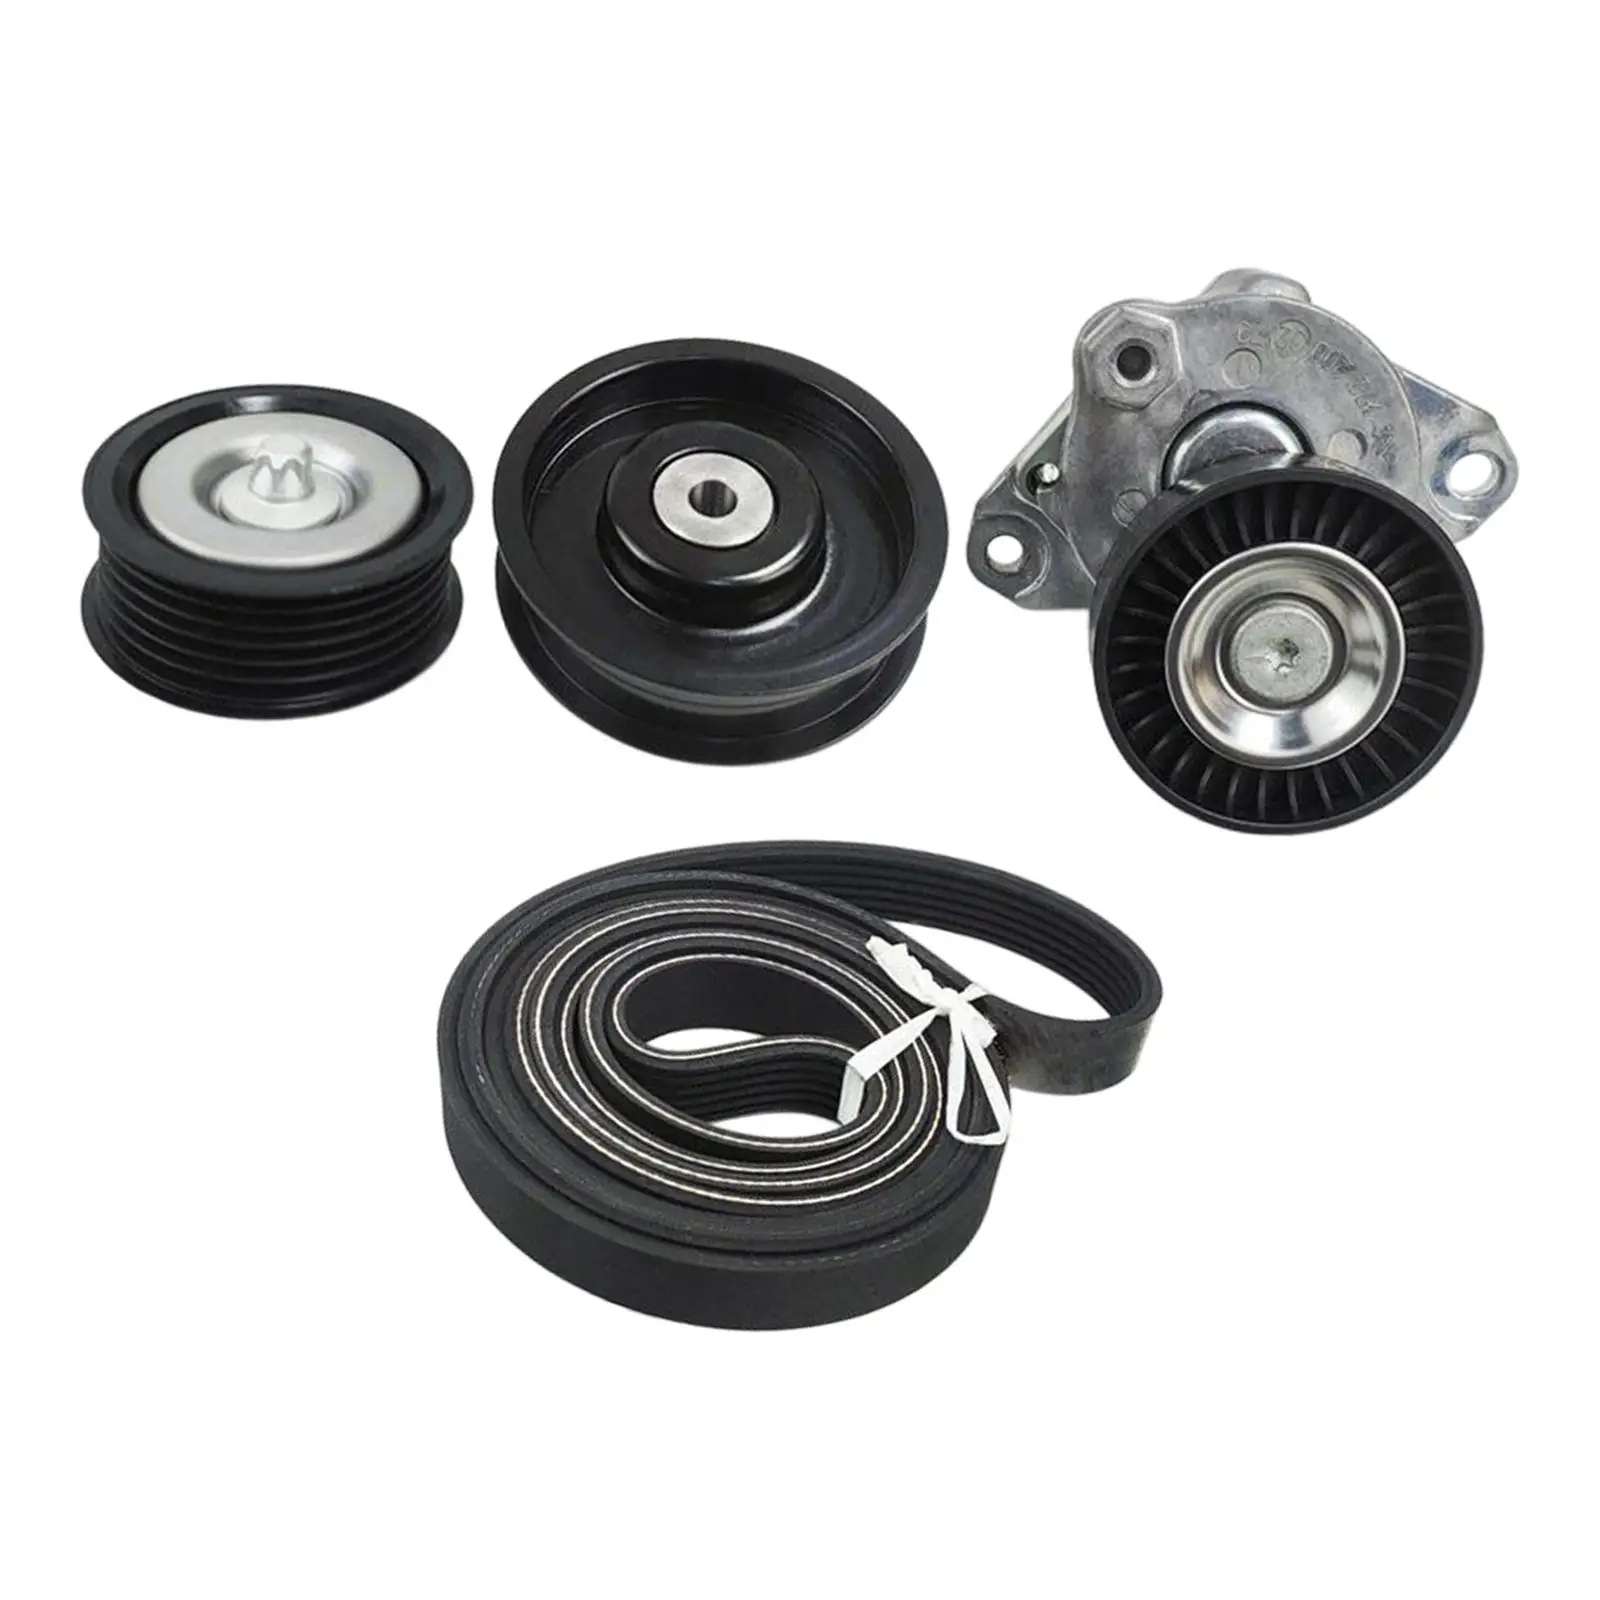 Car Belt Tensioner Pulley Assembly Replacement A2722000270 Repair Parts for C230 C280 C300 CLK350 R350 ml350 Car Accessories